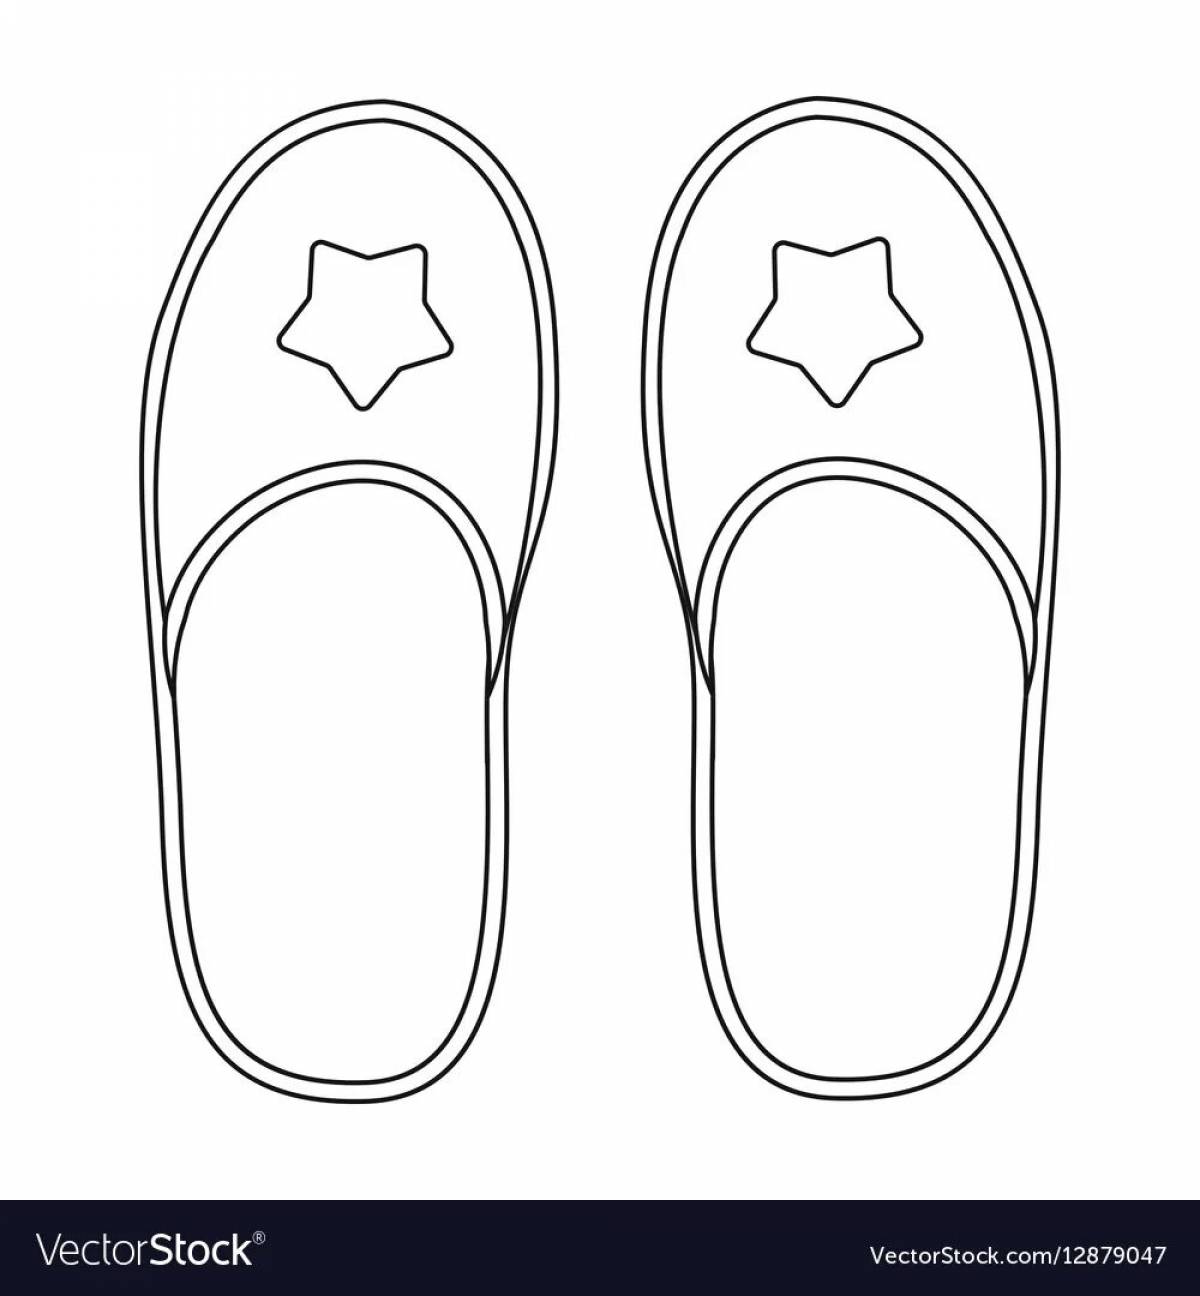 Colouring page for children's enchanting slippers